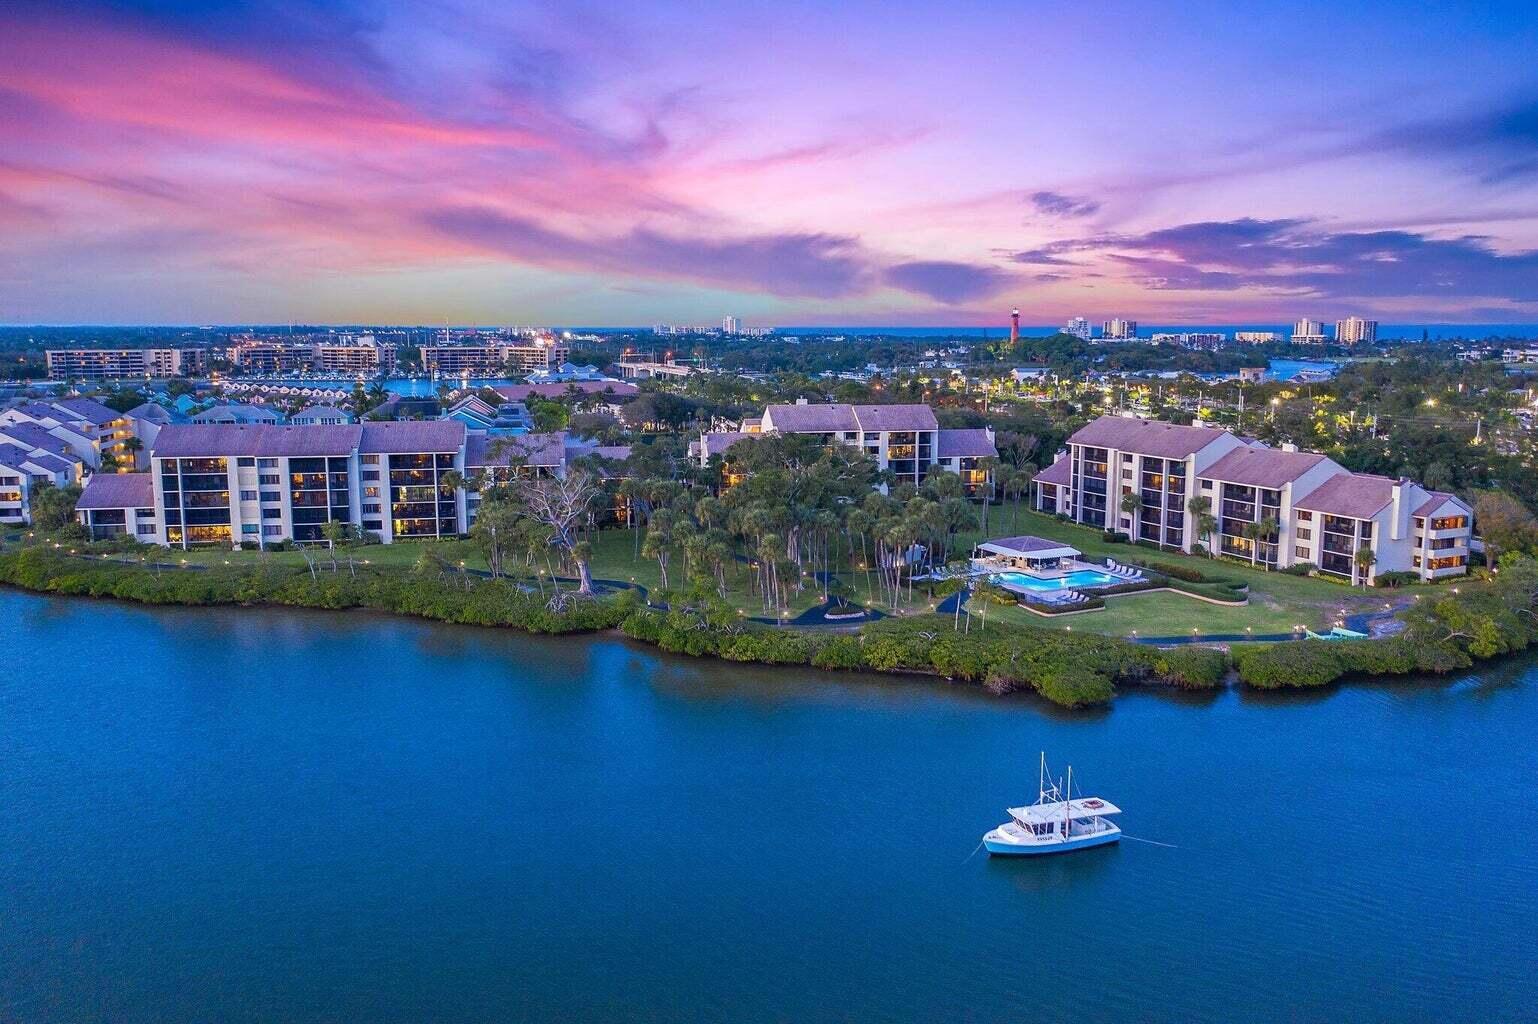 Discover the epitome of coastal luxury with this highly sought-after 2-bedroom, 2-bathroom corner residence at the prestigious 1000 North address in Jupiter Harbour. A haven for those who appreciate breathtaking views, contemporary elegance, and a wealth of nearby amenities. This residence boasts spectacular Intracoastal views, offering mesmerizing sunsets from the expansive private screened-in balcony. The thoughtfully designed split floor plan provides privacy, with the guest room featuring its own sliding door to the second screened terrace and ensuite bathroom, creating an ideal second master bedroom. Experience the luxury of a second private screened-in balcony off the dining room area, perfect for al fresco dining and entertaining. (more) The upgraded kitchen is a chef's delight, featuring stainless steel appliances, including a new Bosch dishwasher, a glass top stove with double oven, under-cabinet lighting, softclose cabinets and pullout drawers, and granite countertops. Elegant hardwood floors enhance the sophistication of the living room and bedrooms. Hurricane shutters ensure peace of mind, and the new AC system installed in 2017 with 10 kw with UVC system plus ironizing electronice air cleaner with lifetime warranty that contributes to improved air quality. Ample storage space is available, with a spacious laundry room, numerous closets inside, and additional storage outside.
Benefit from the added value of a brand-new roof installed in 2024, ensuring long-term durability and reducing any concerns for the new homeowner. Enjoy the exclusivity of Jupiter Harbour, a 24/7 guard-gated community offering a heated pool/spa, lighted tennis/pickleball courts, and picturesque walking paths along the community and the Intracoastal. Spot dolphins, manatees, sea turtles, otters, and a variety of beautiful birds during your morning strolls or fishing excursions. Convenience is at your fingertips, with assigned covered parking and storage just steps away, and plenty of guest parking available. Indulge in the vibrant lifestyle with proximity to Jupiter's best restaurants, shopping plazas, Harbourside, Riverwalk, and iconic landmarks like the Jupiter Lighthouse. Experience the unique transportation convenience of Zeke's golf cart taxi service, available to pick you up right from the Jamaica building. Outdoor adventures await, with activities like paddleboarding, kayaking, snorkeling, and more, all within reach of Dubois Park, Burt Reynolds Park, and the Loxahatchee River Museum. Your new adventure awaits in this exceptional residence at 1000 North - Jupiter Harbour. Schedule a private showing and embrace the unparalleled lifestyle that comes with this remarkable property.